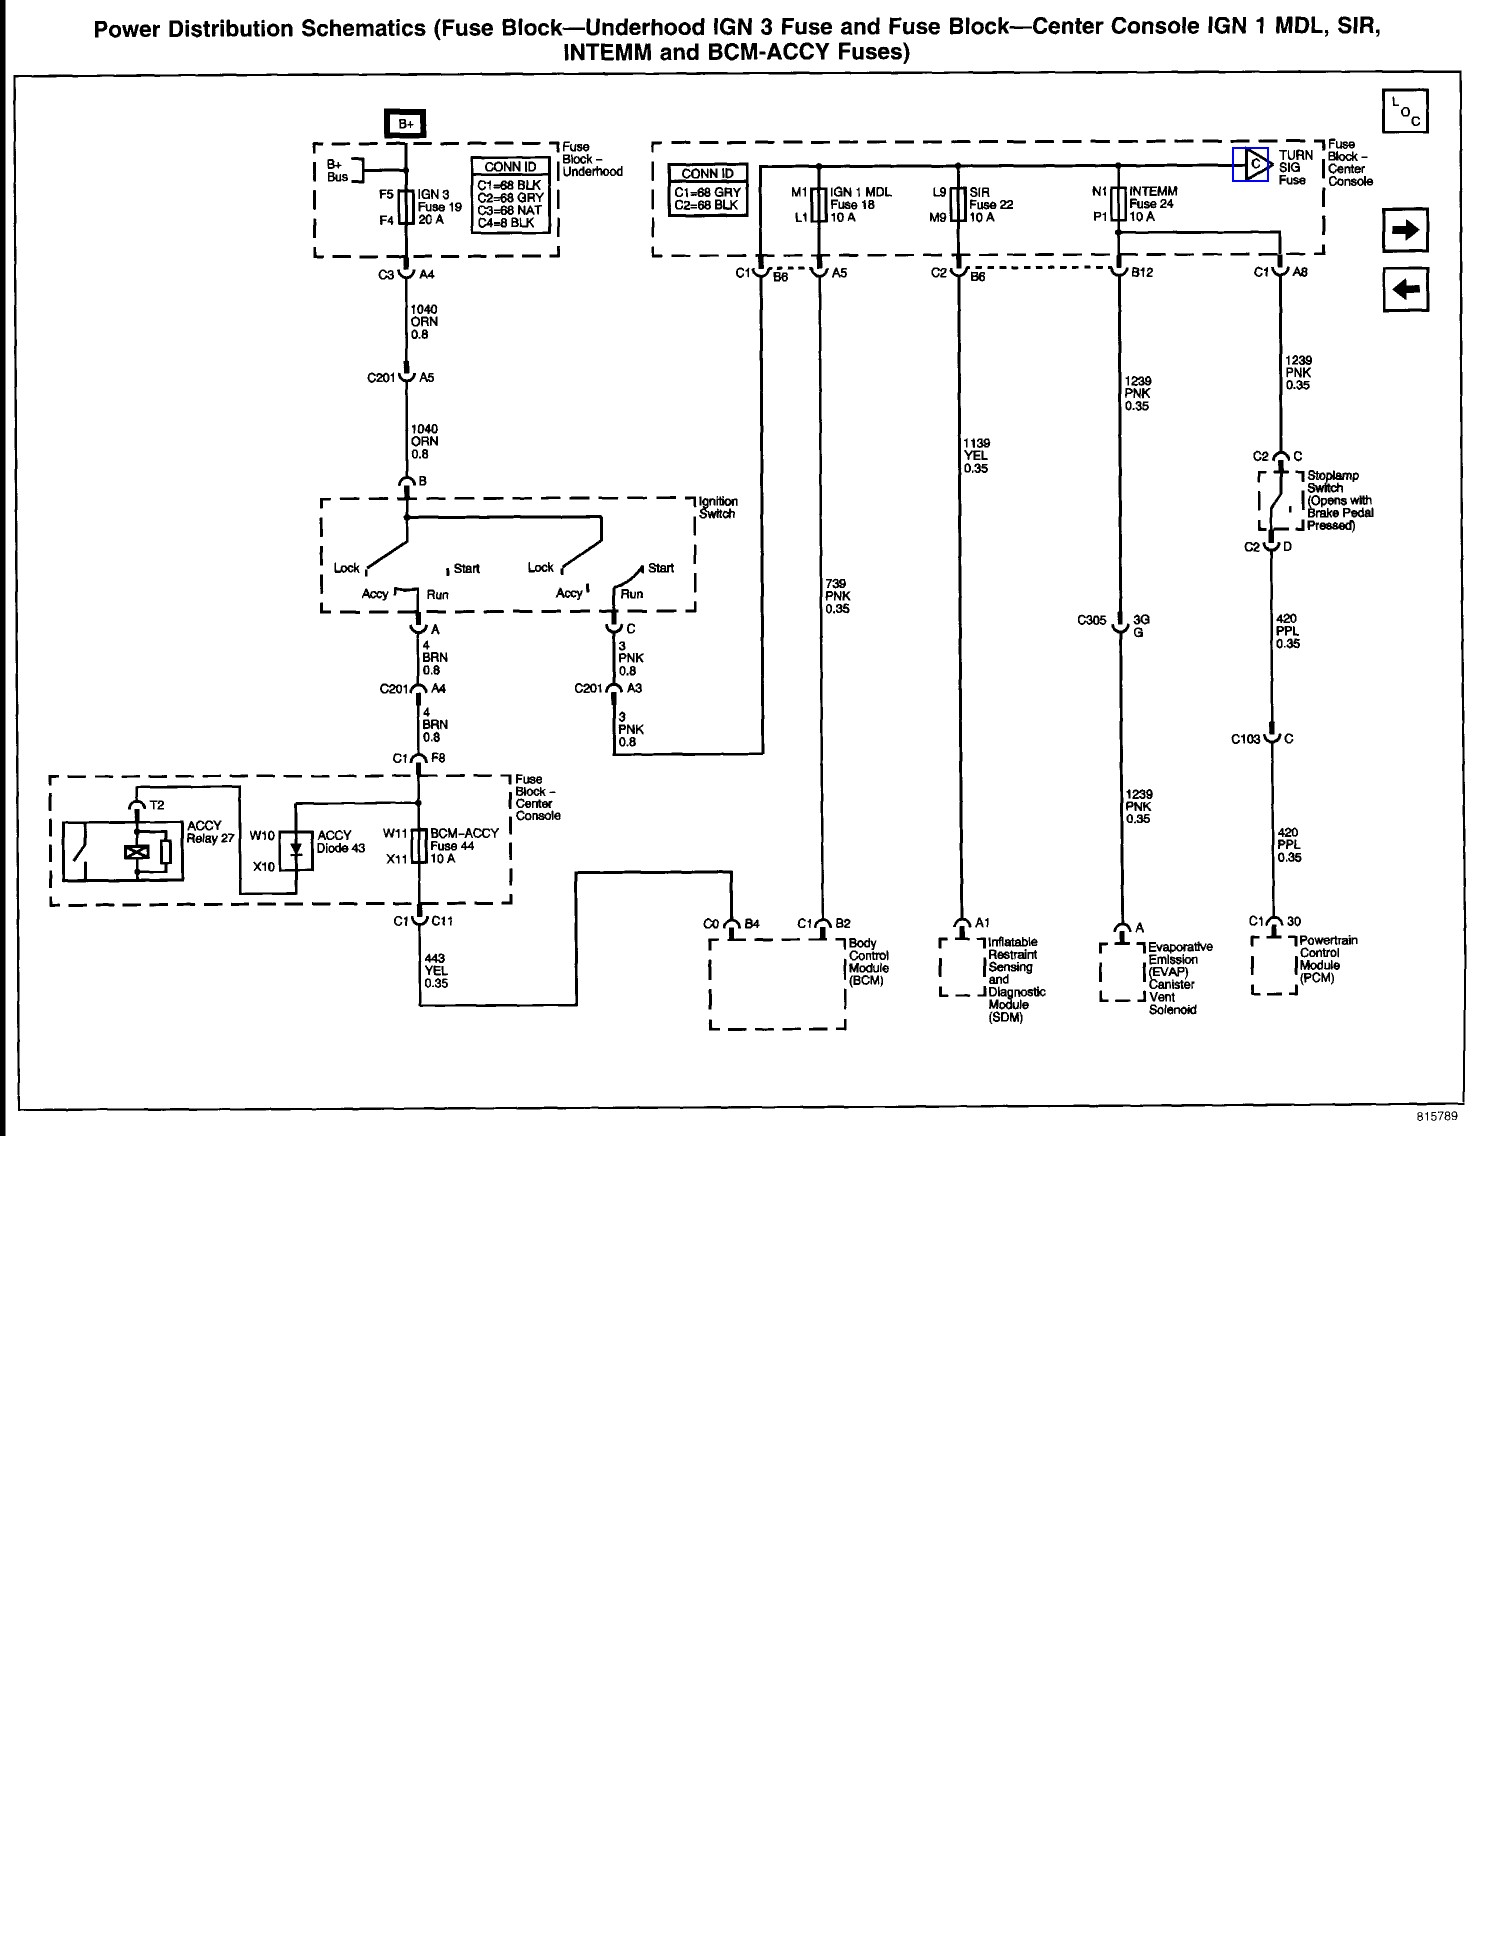 2002 Buick Century Engine Diagram Wiring Diagram 2004 Buick Rendezvous Simple Guide About Of 2002 Buick Century Engine Diagram